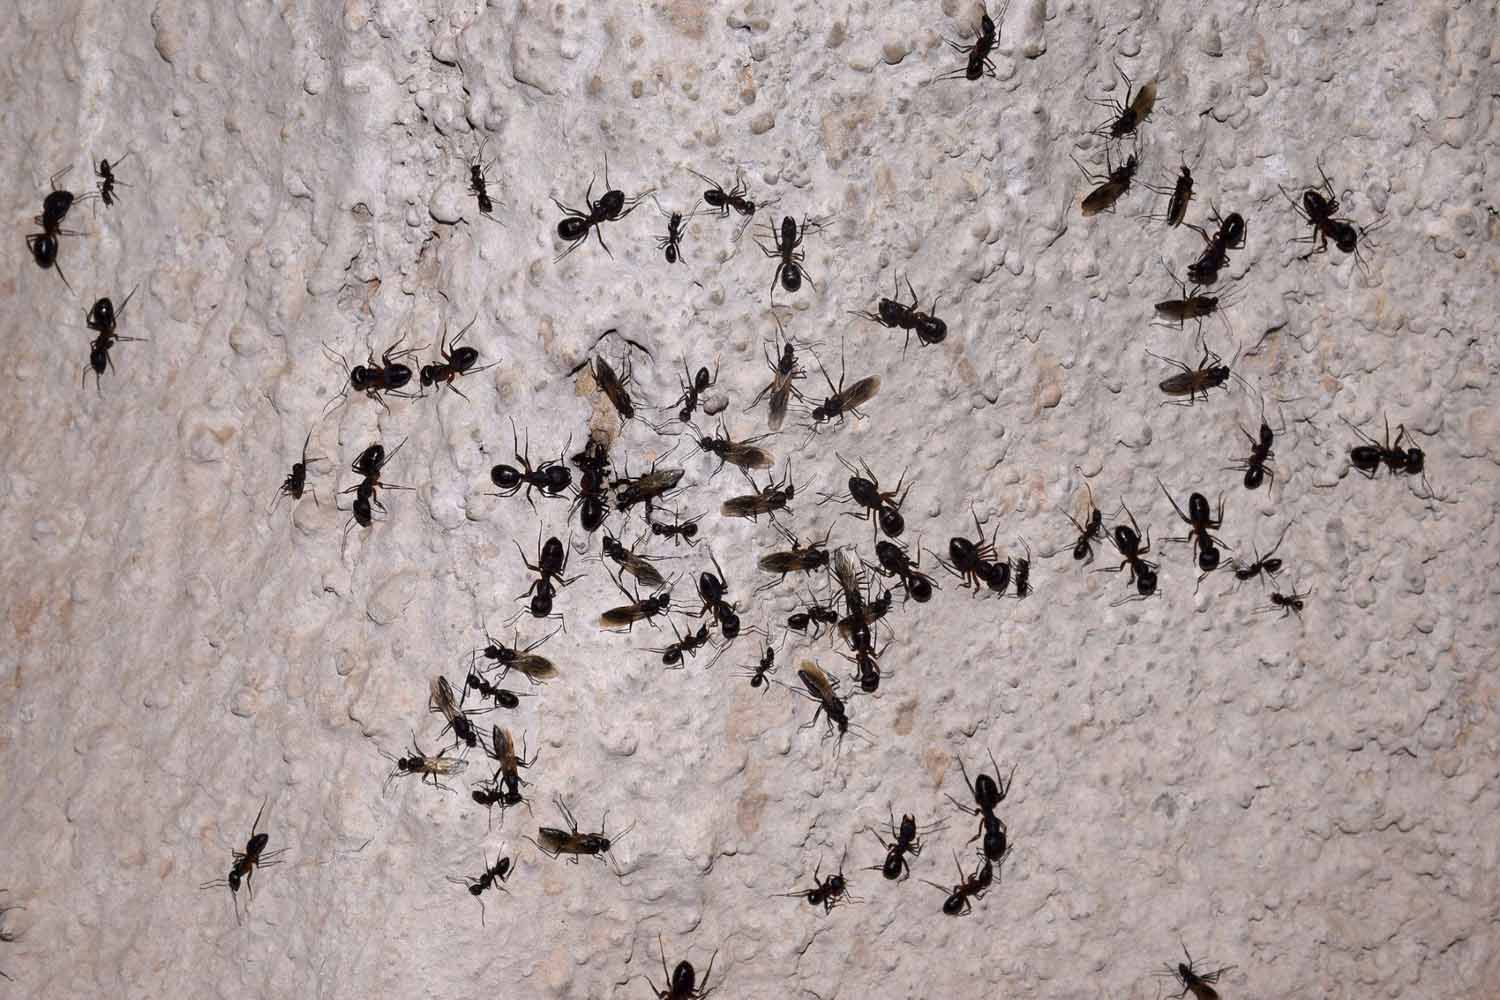 Black ants all over the wall of a house